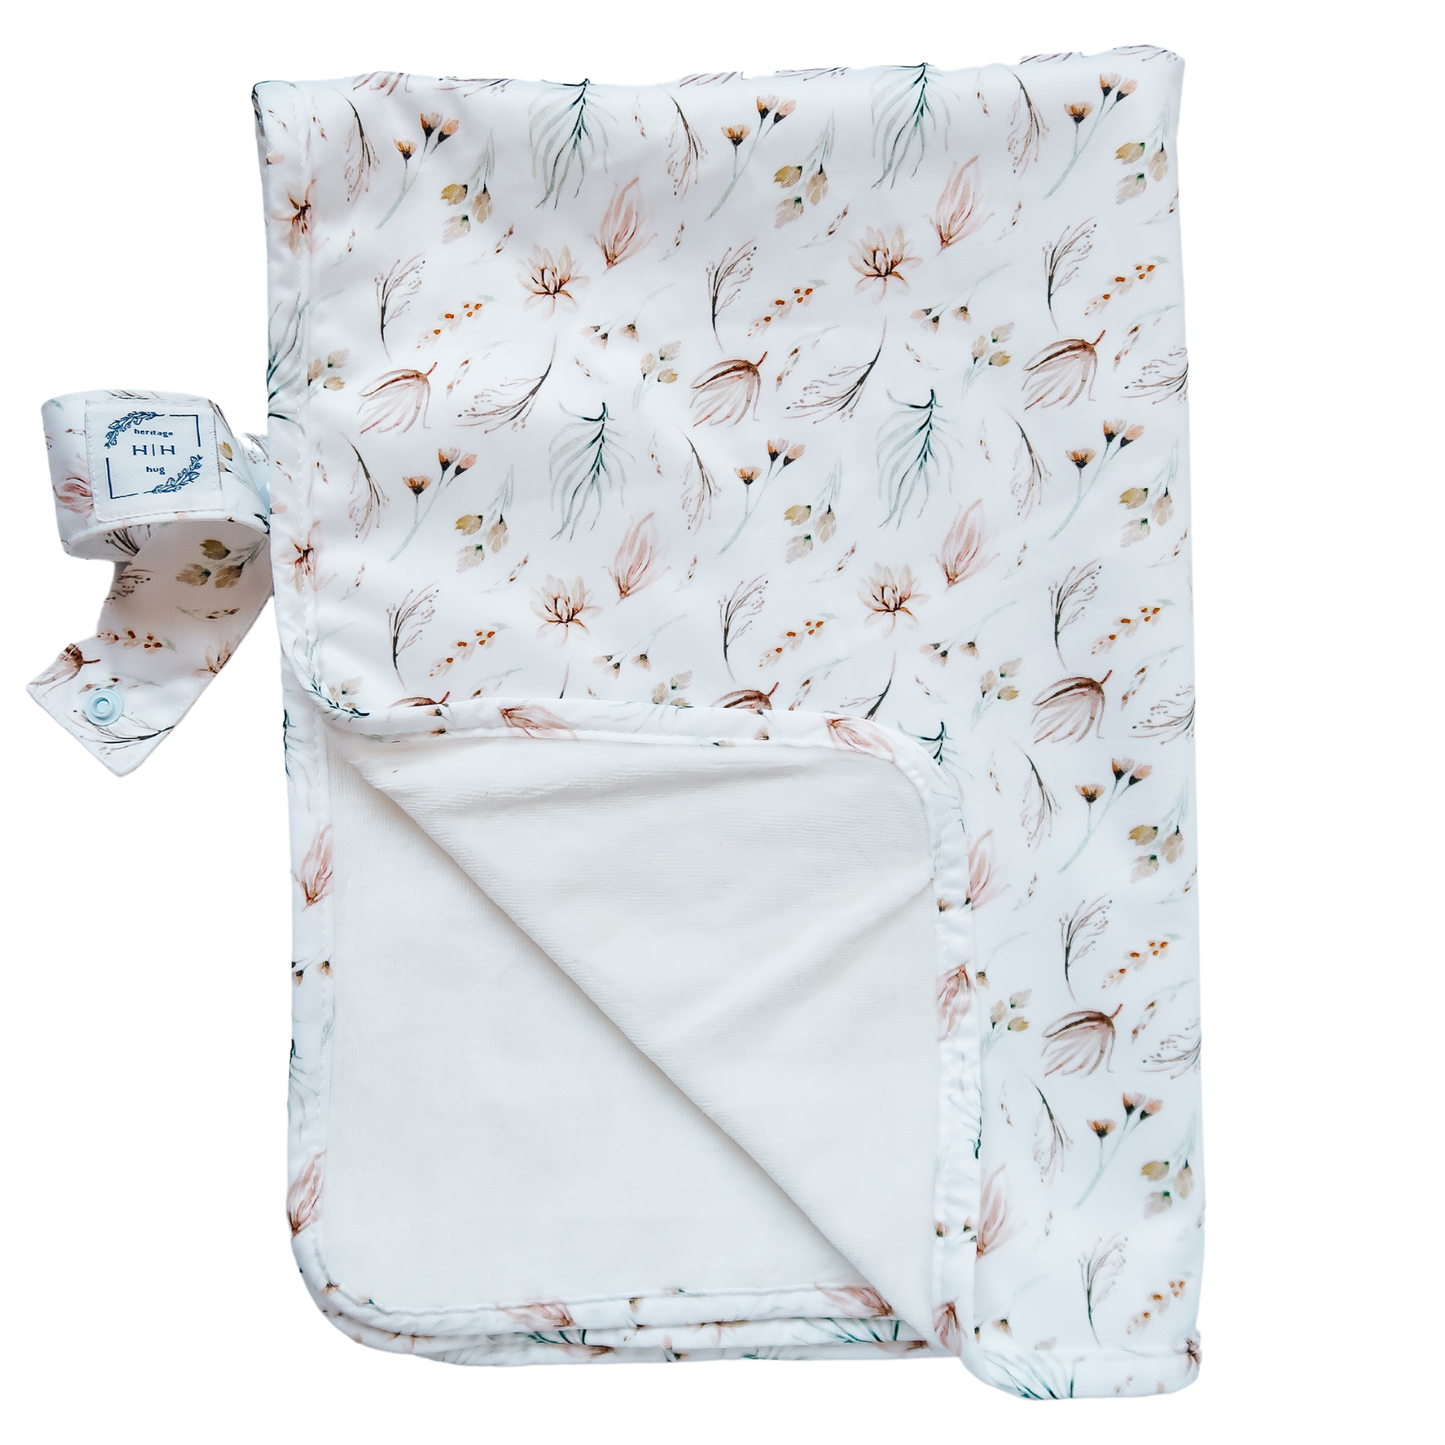 Portable Changing Mat "Dainty Meadow" - heritagehug